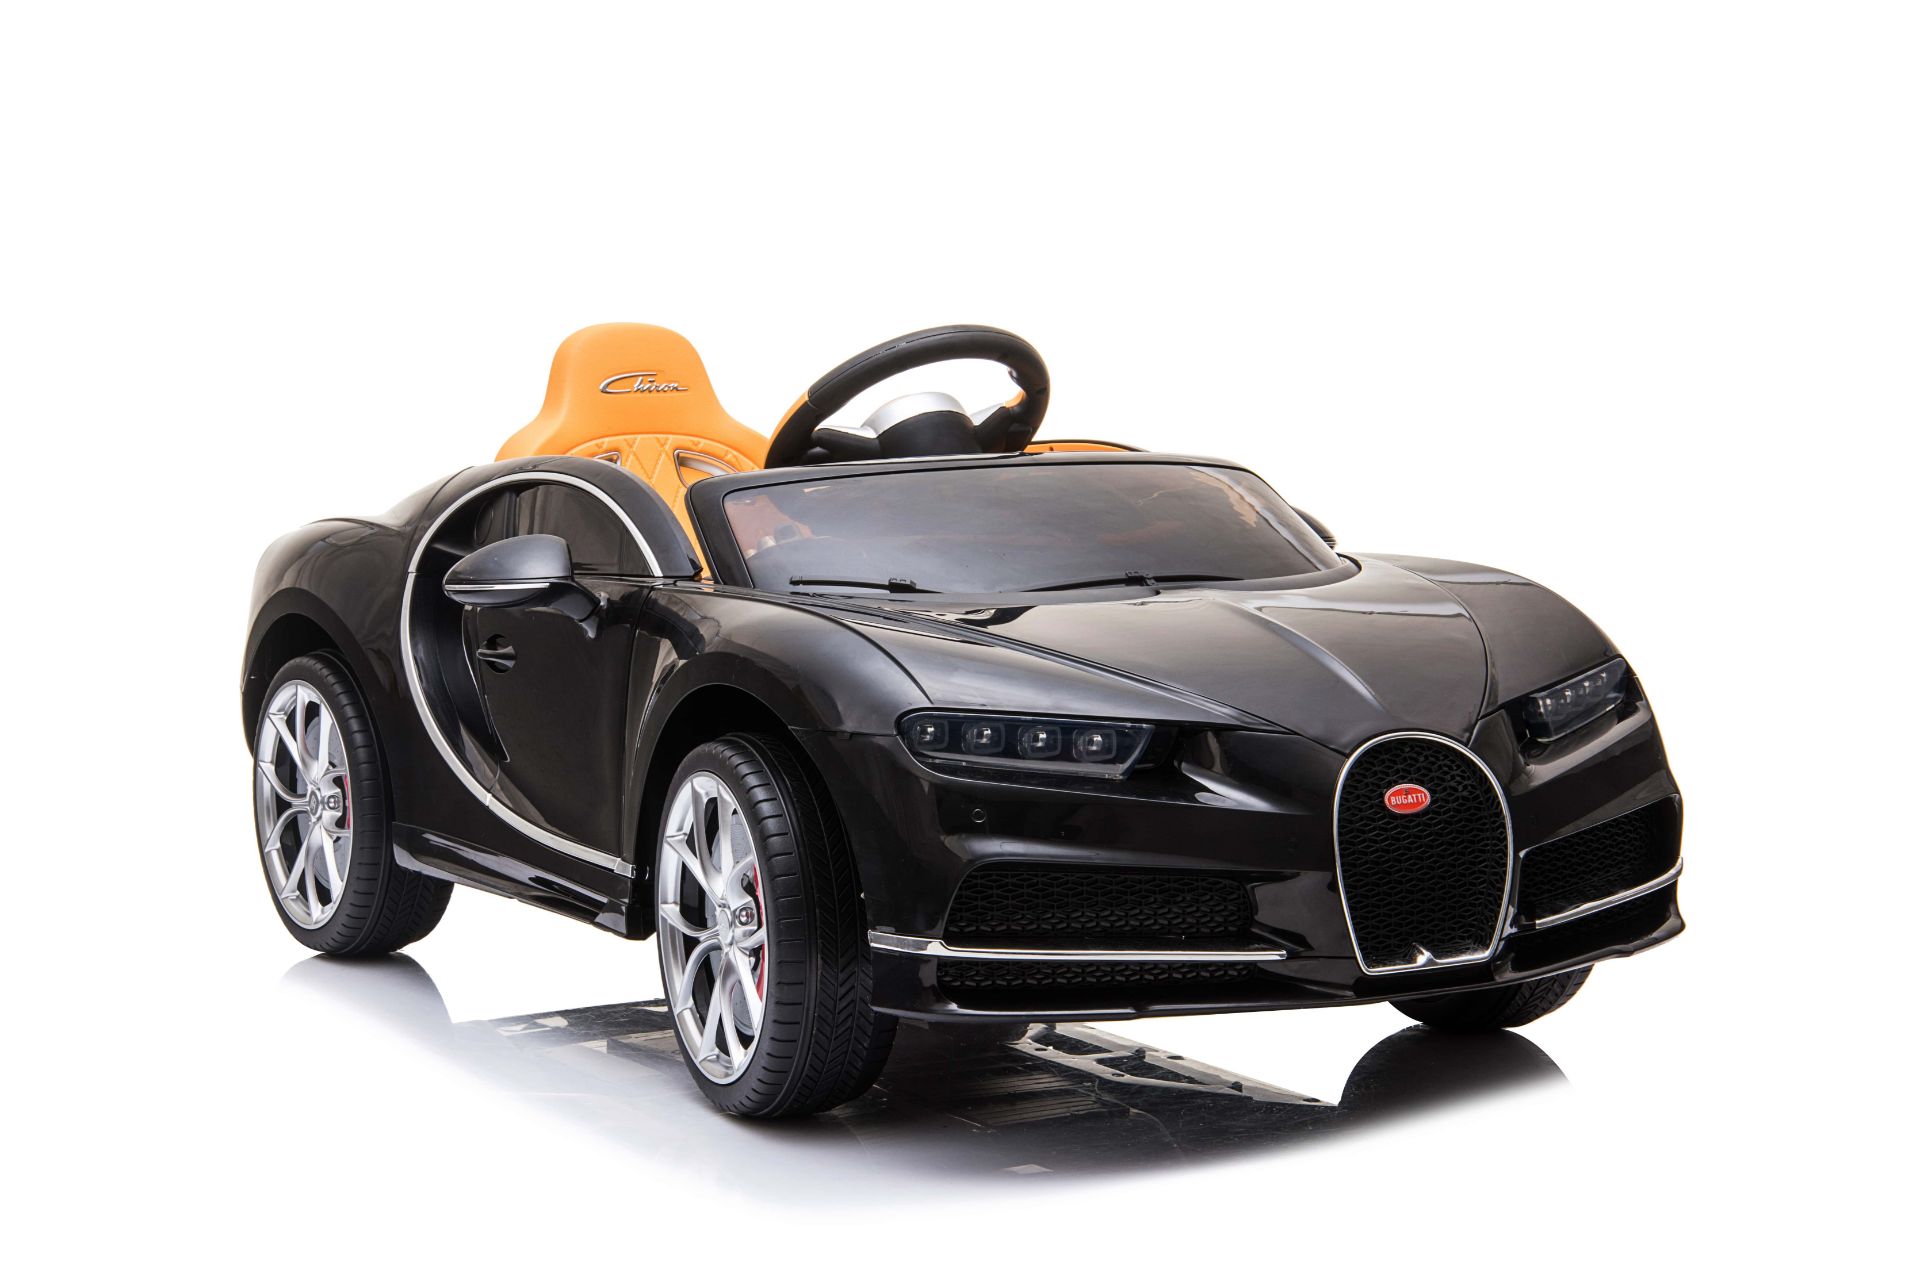 RIDE ON FULLY LICENCED BUGATTI CHIRON 12V WITH PARENTAL REMOTE CONTROL - BLACK